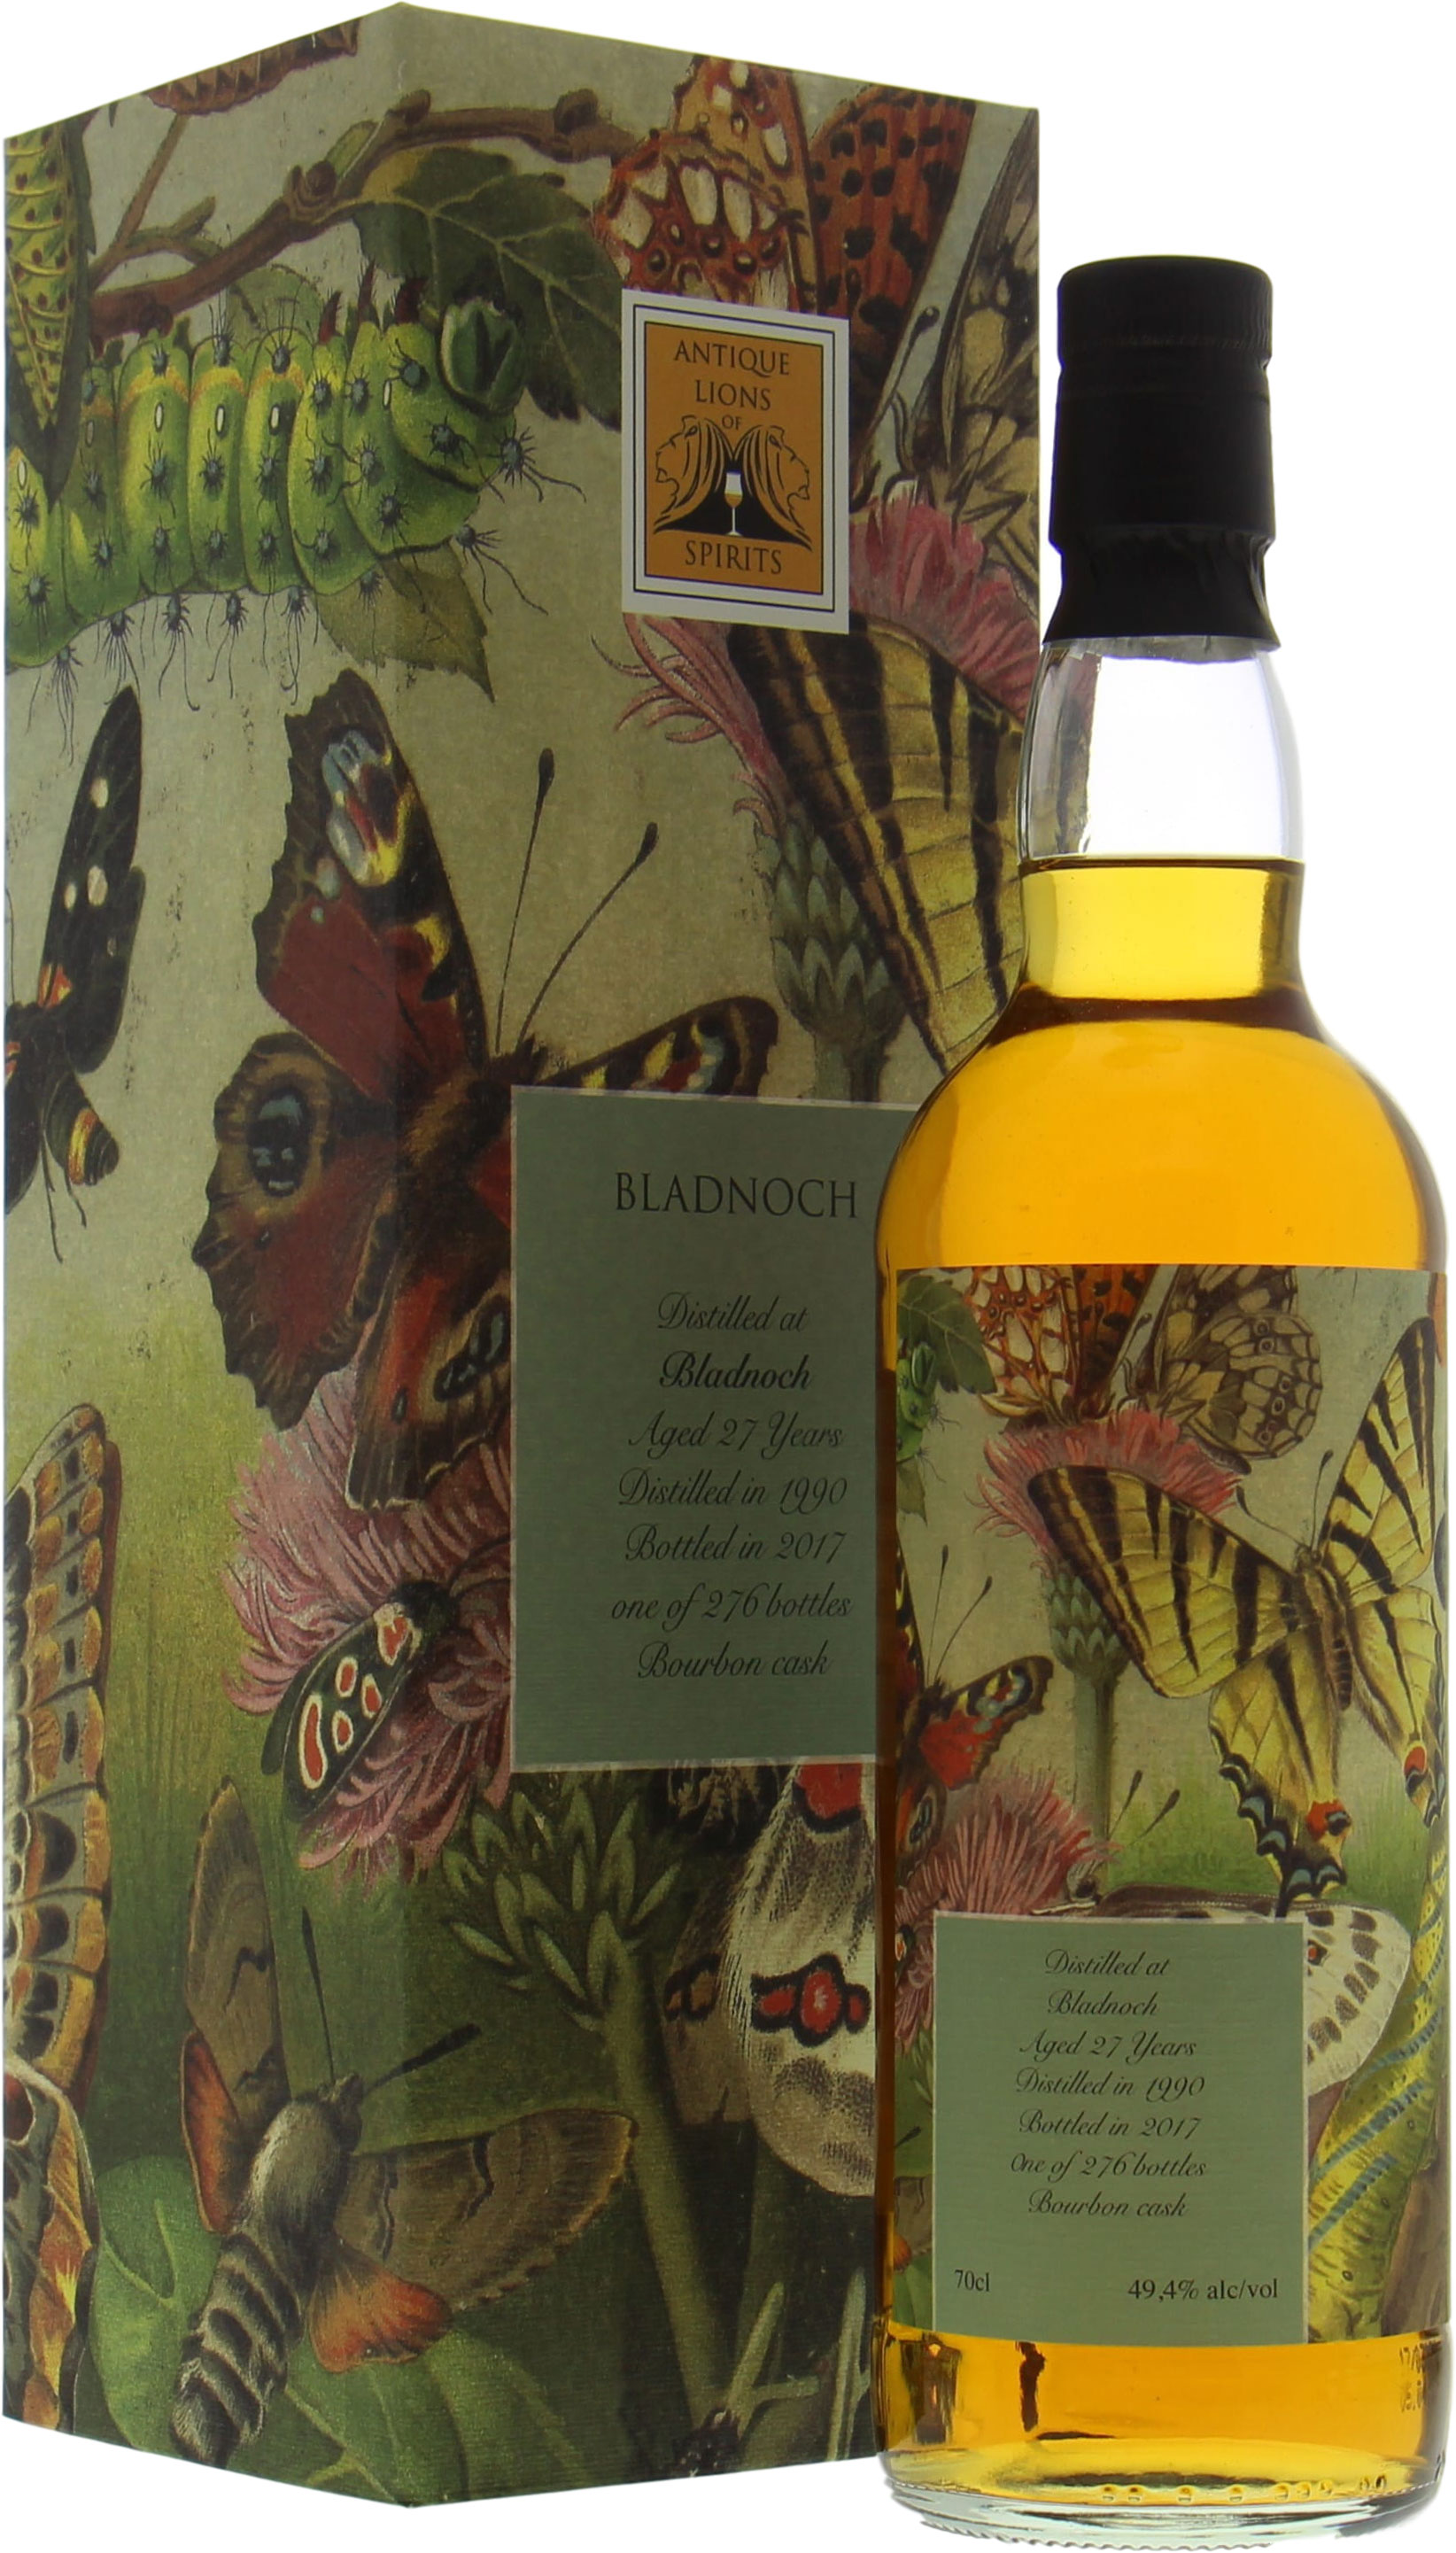 Bladnoch - 27 Years Old Antique Lions of Spirits The Butterflies 49.4% 1990 In Original Container